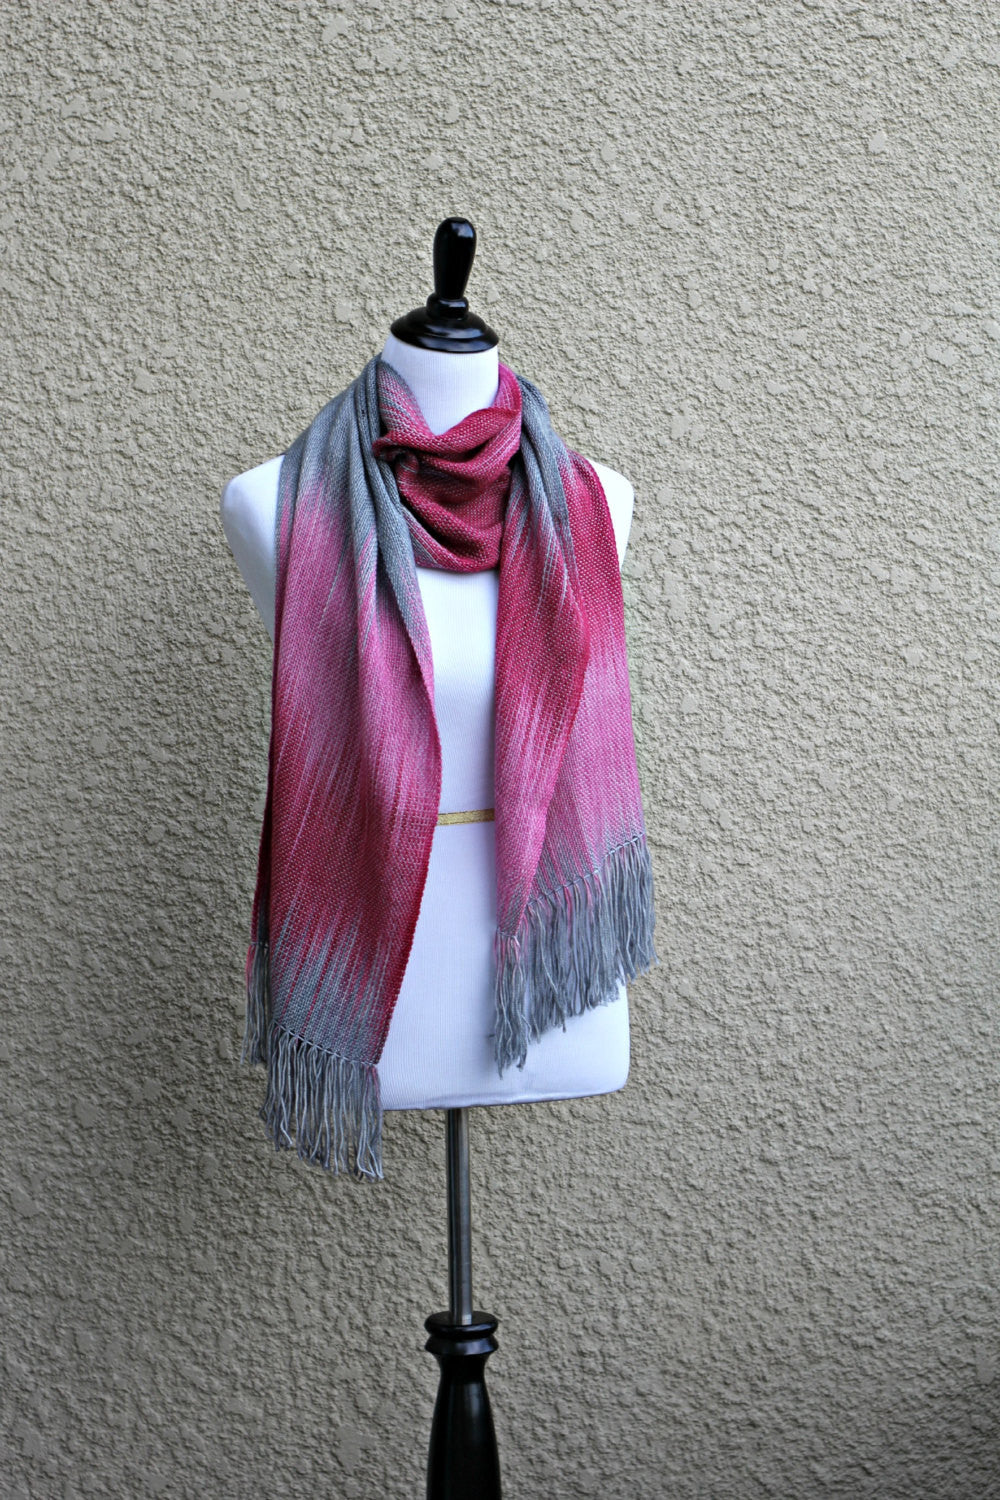 Woven pink scarf